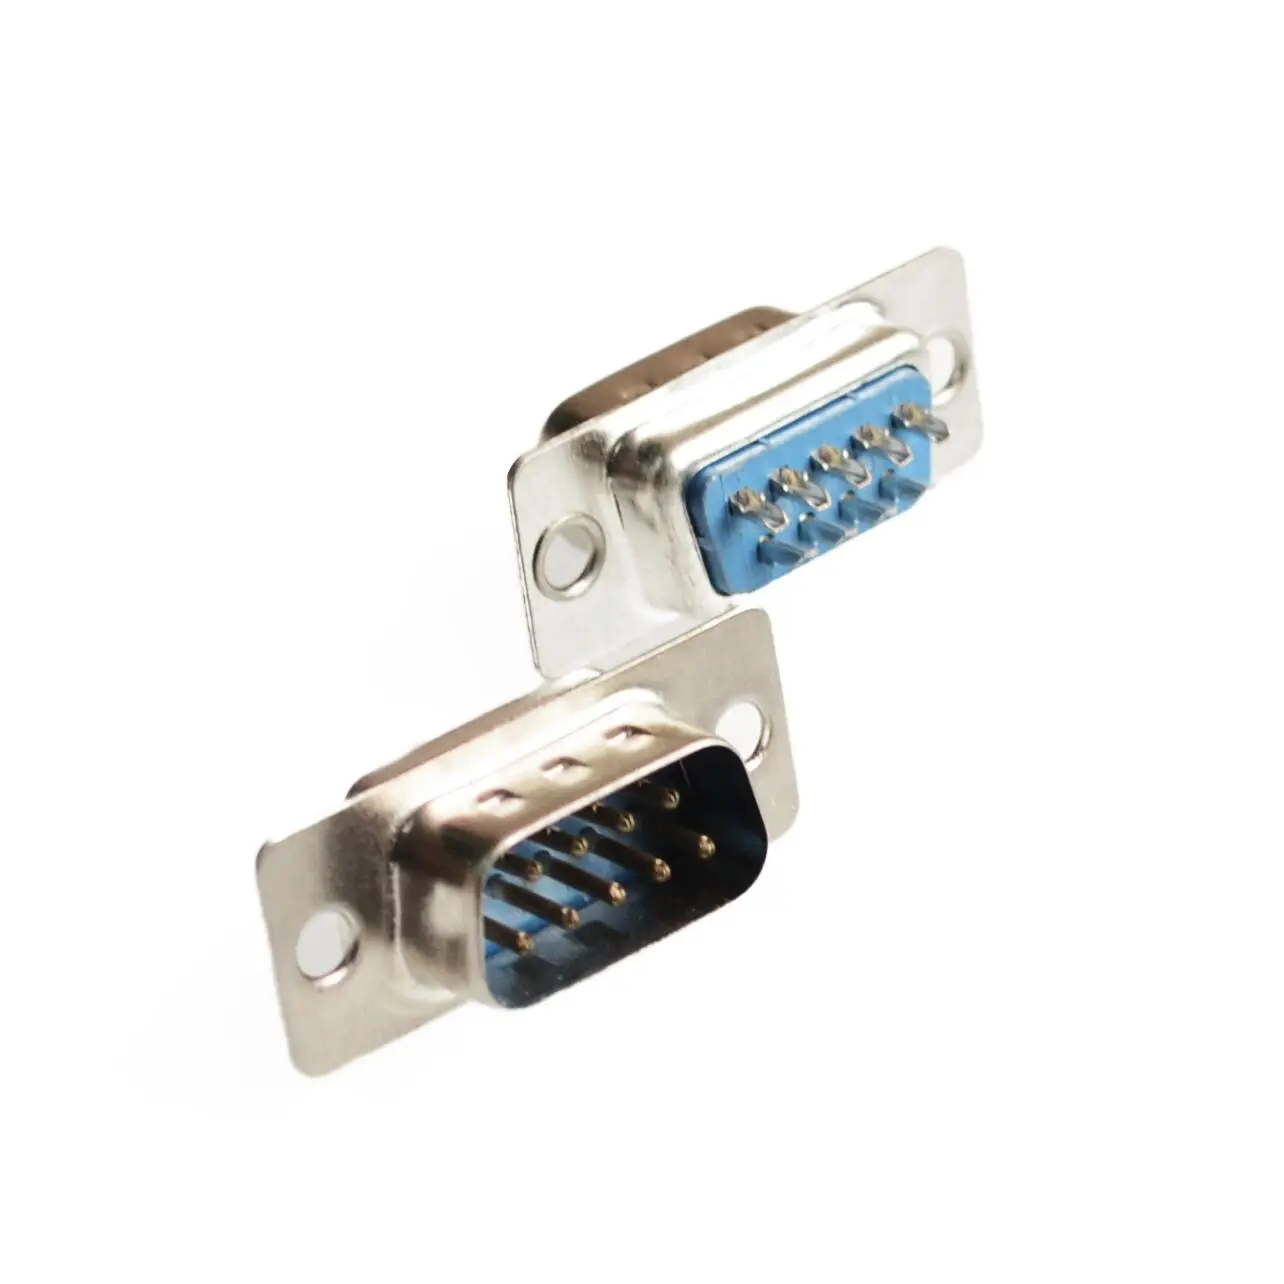 RS232 9 Pin DB9 male Solder Plug Serial Port Connector DB9 2 rows 9 pin